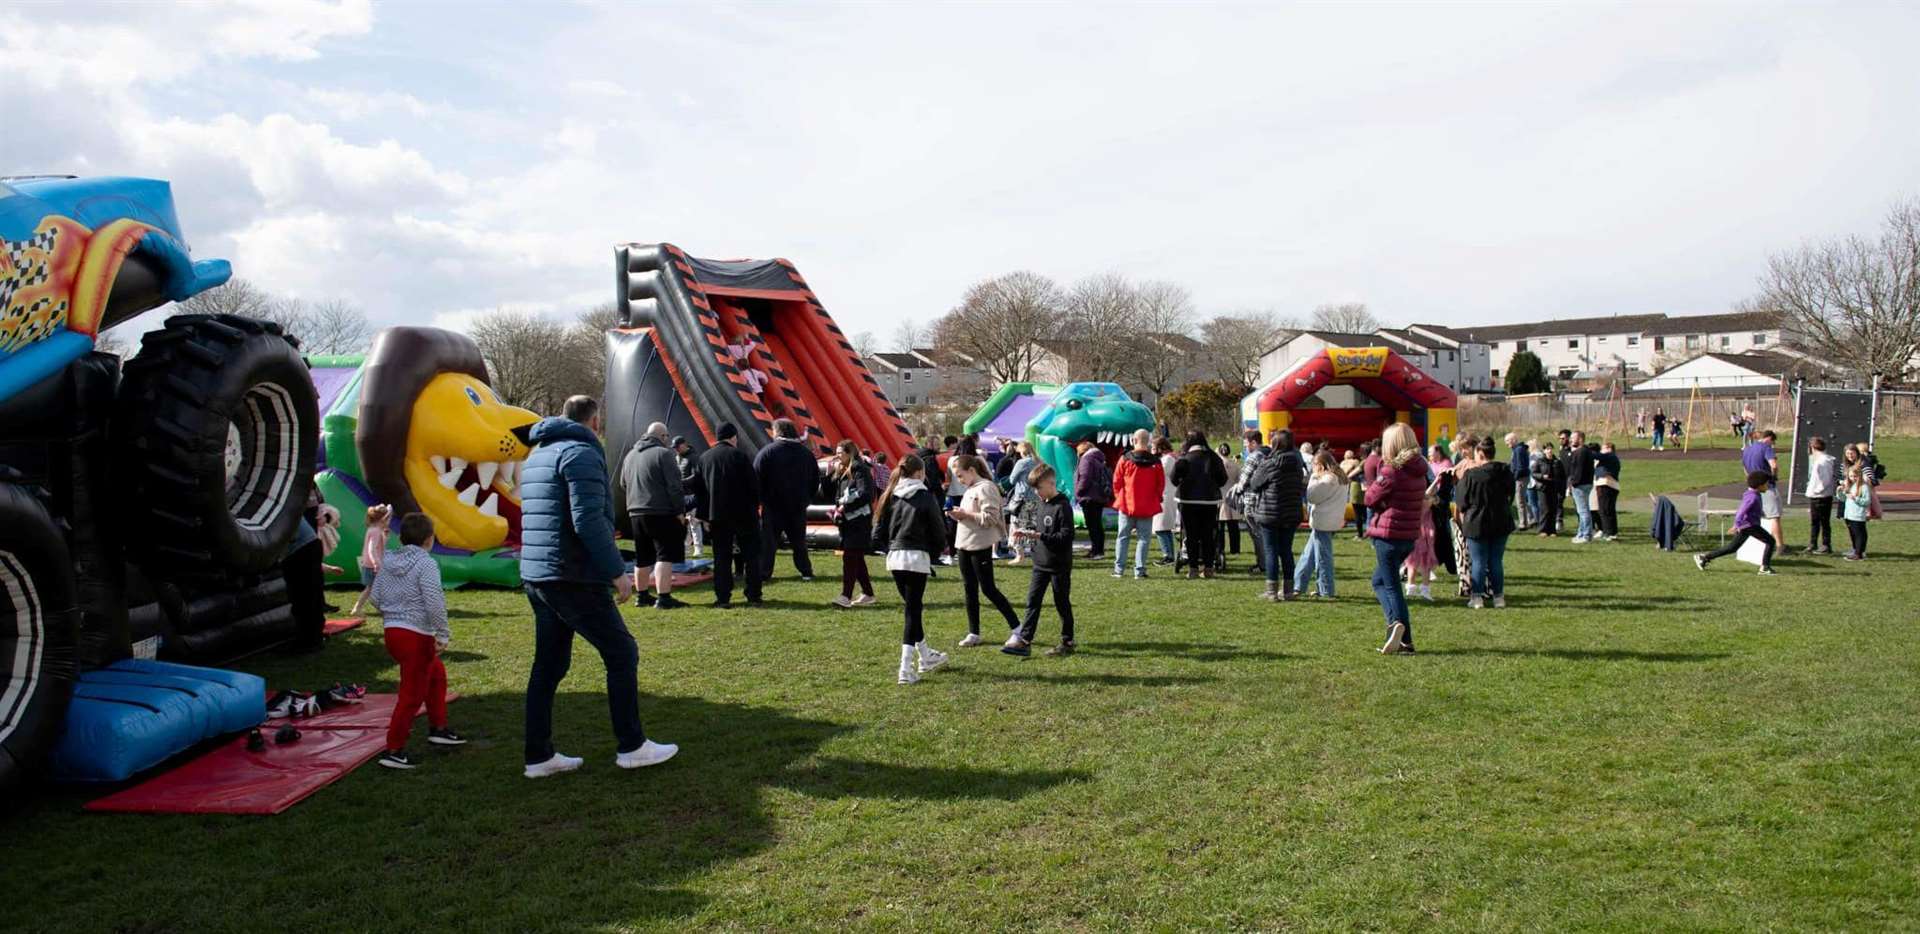 There was an impressive array of bouncy castle attractions. Picture: Craig Johnson at ‘I Do Photography’.